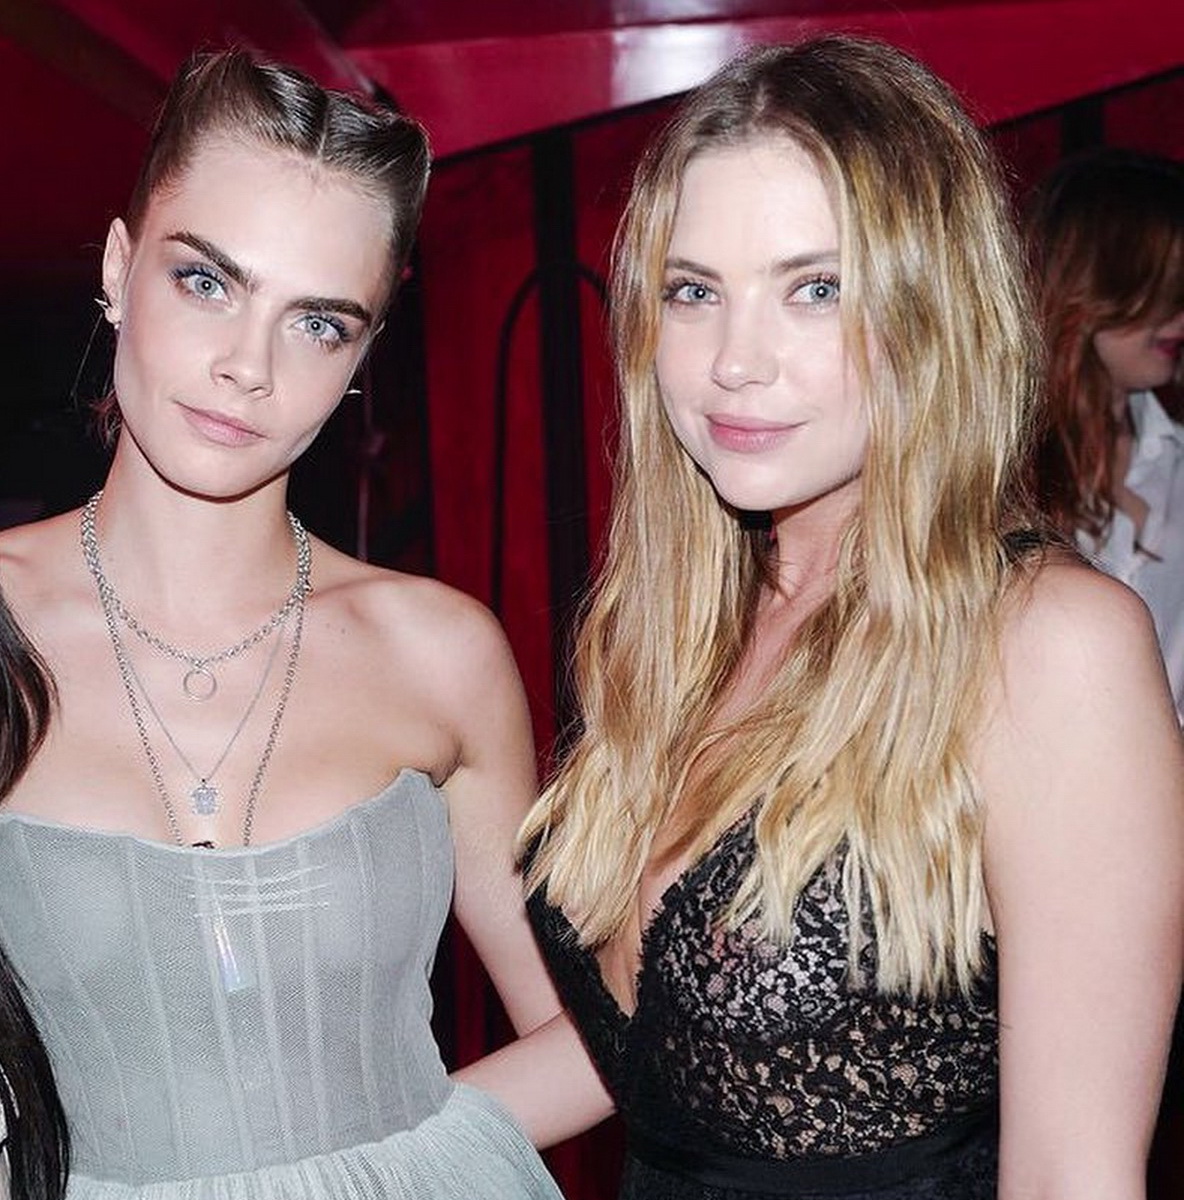 Ashley Benson and Cara Delevigne braless in see thru dress on Dior Lipstick Launch Party HQ (1).jpg